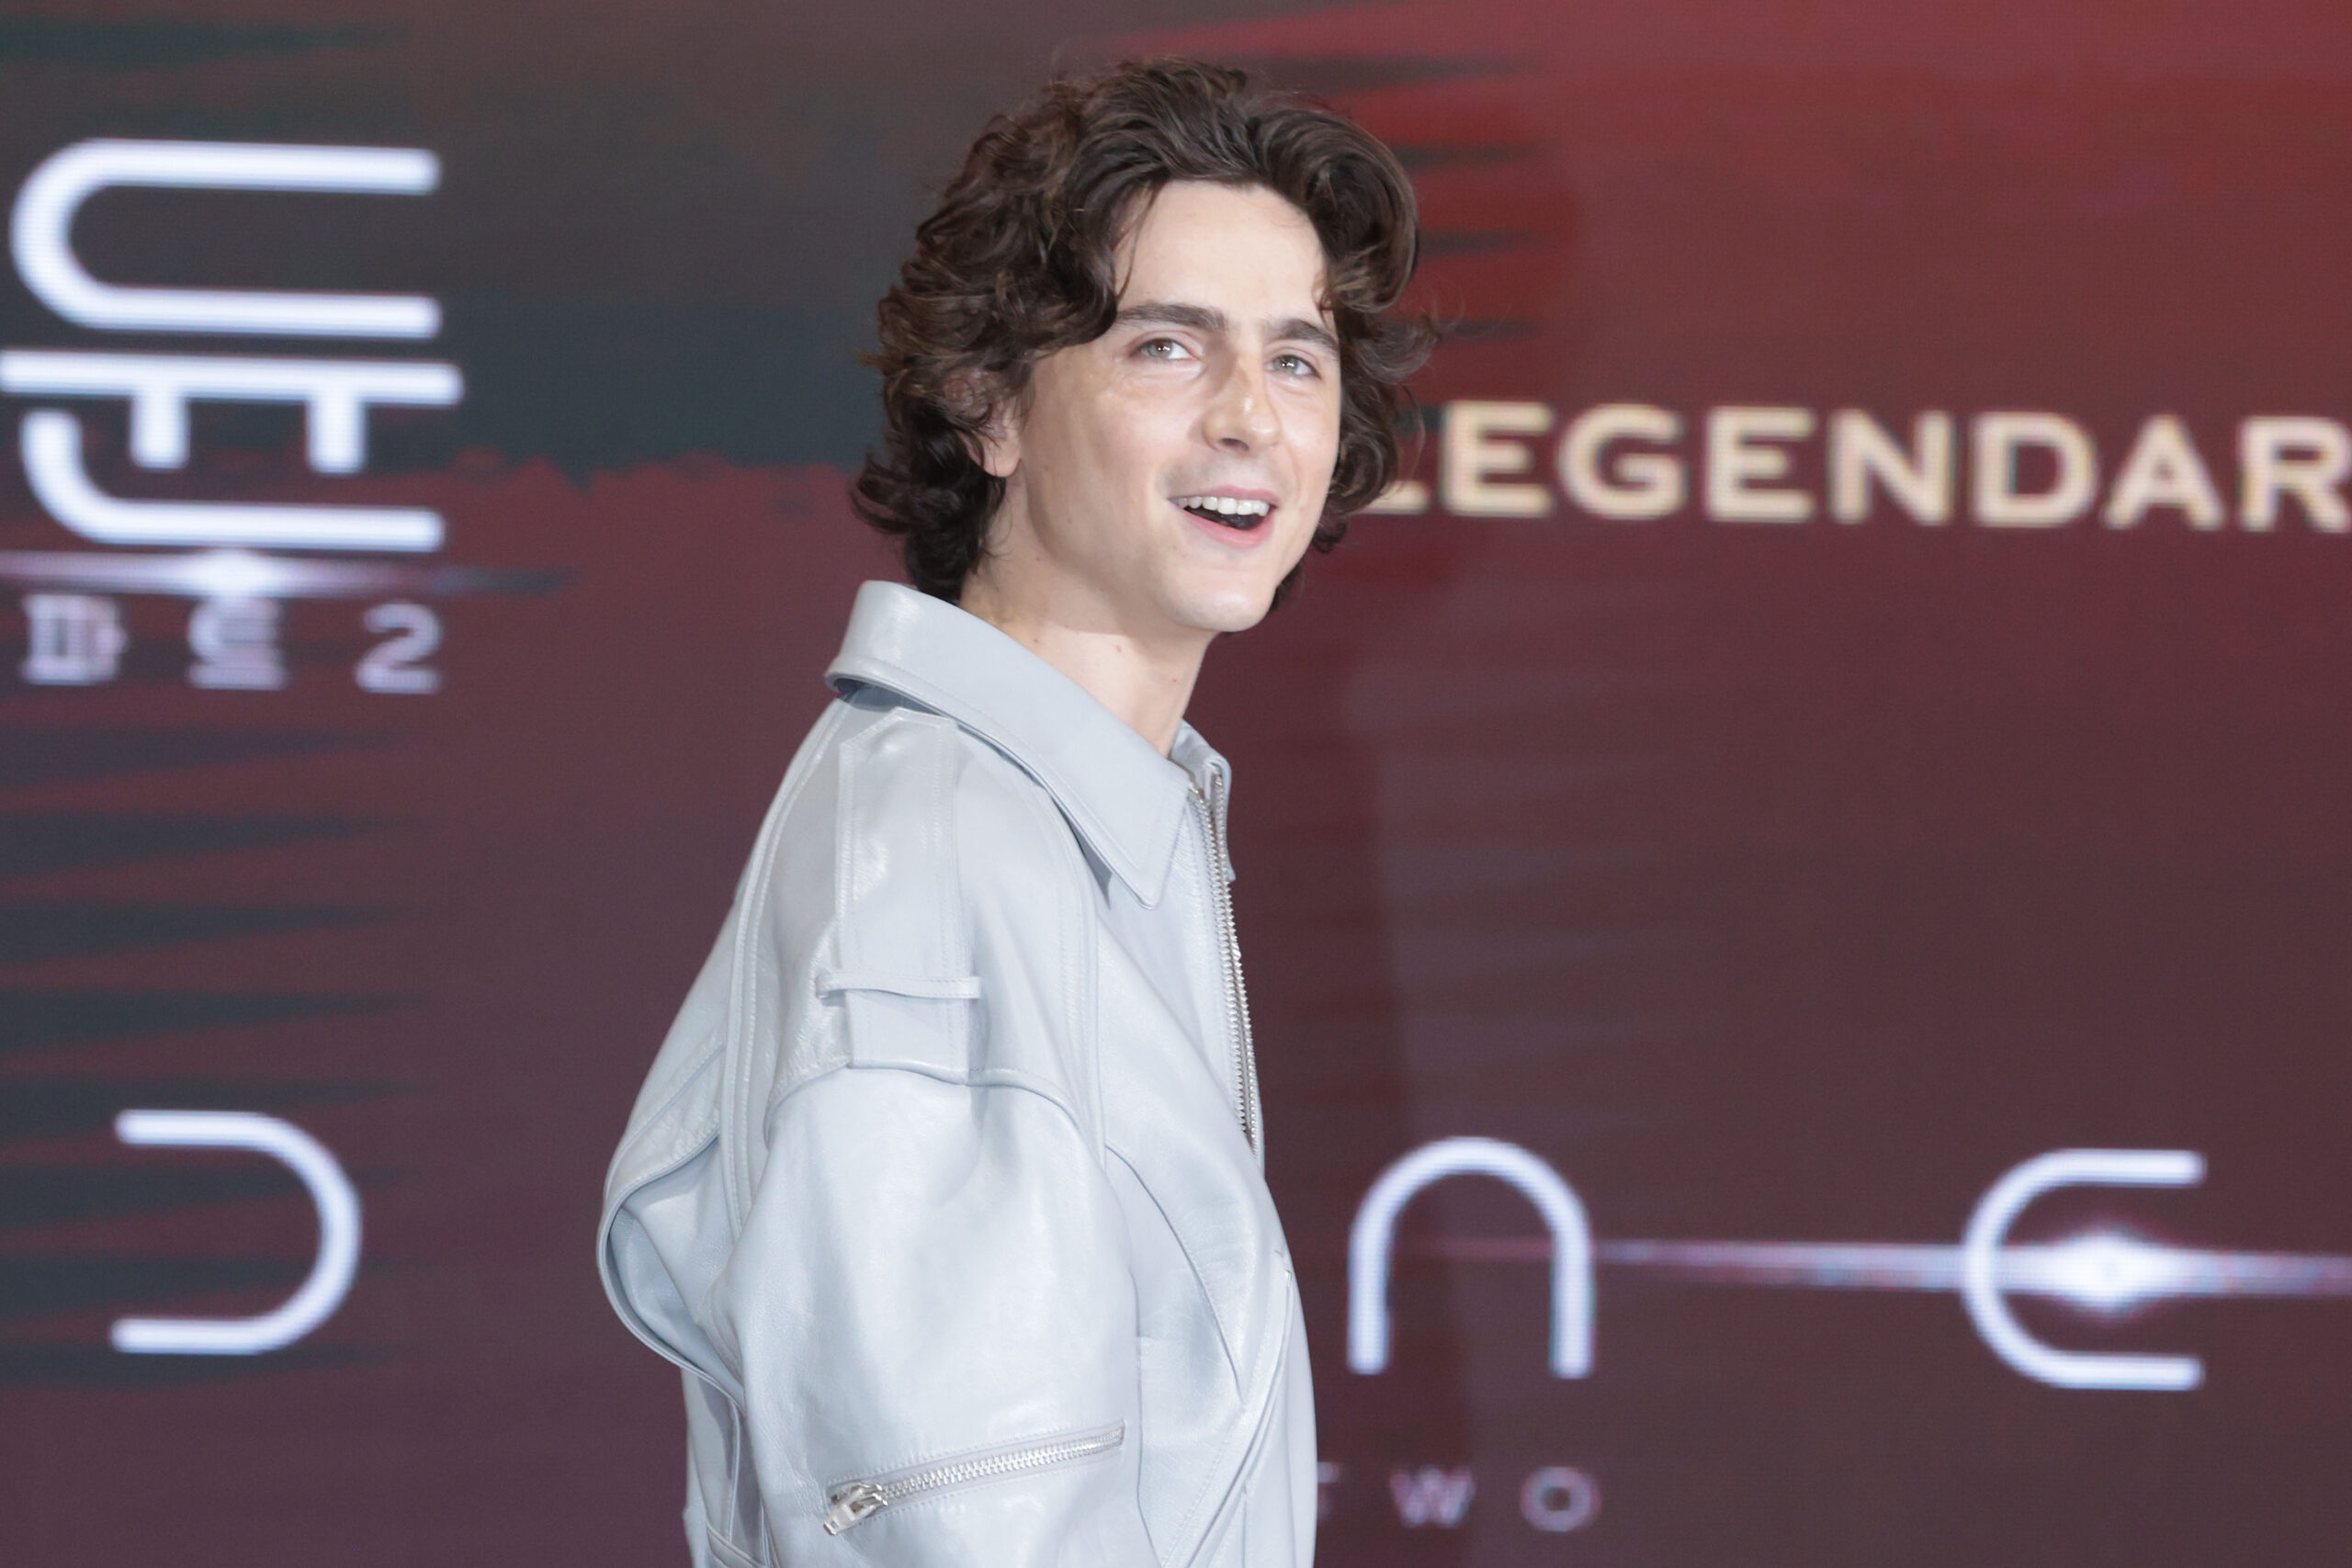 Hollywood actor Timothee Chalamet in Seoul Hollywood actor Timothee Chalamet enters a publicity event in Seoul on Feb. 21, 2024 to promote the epic science fiction movie, "Dune: Part Two." The movie will be released in South Korea on Feb. 28.,Image: 849476445, License: Rights-managed, Restrictions: , Model Release: no, Credit line: Yonhap News / Newscom / Profimedia